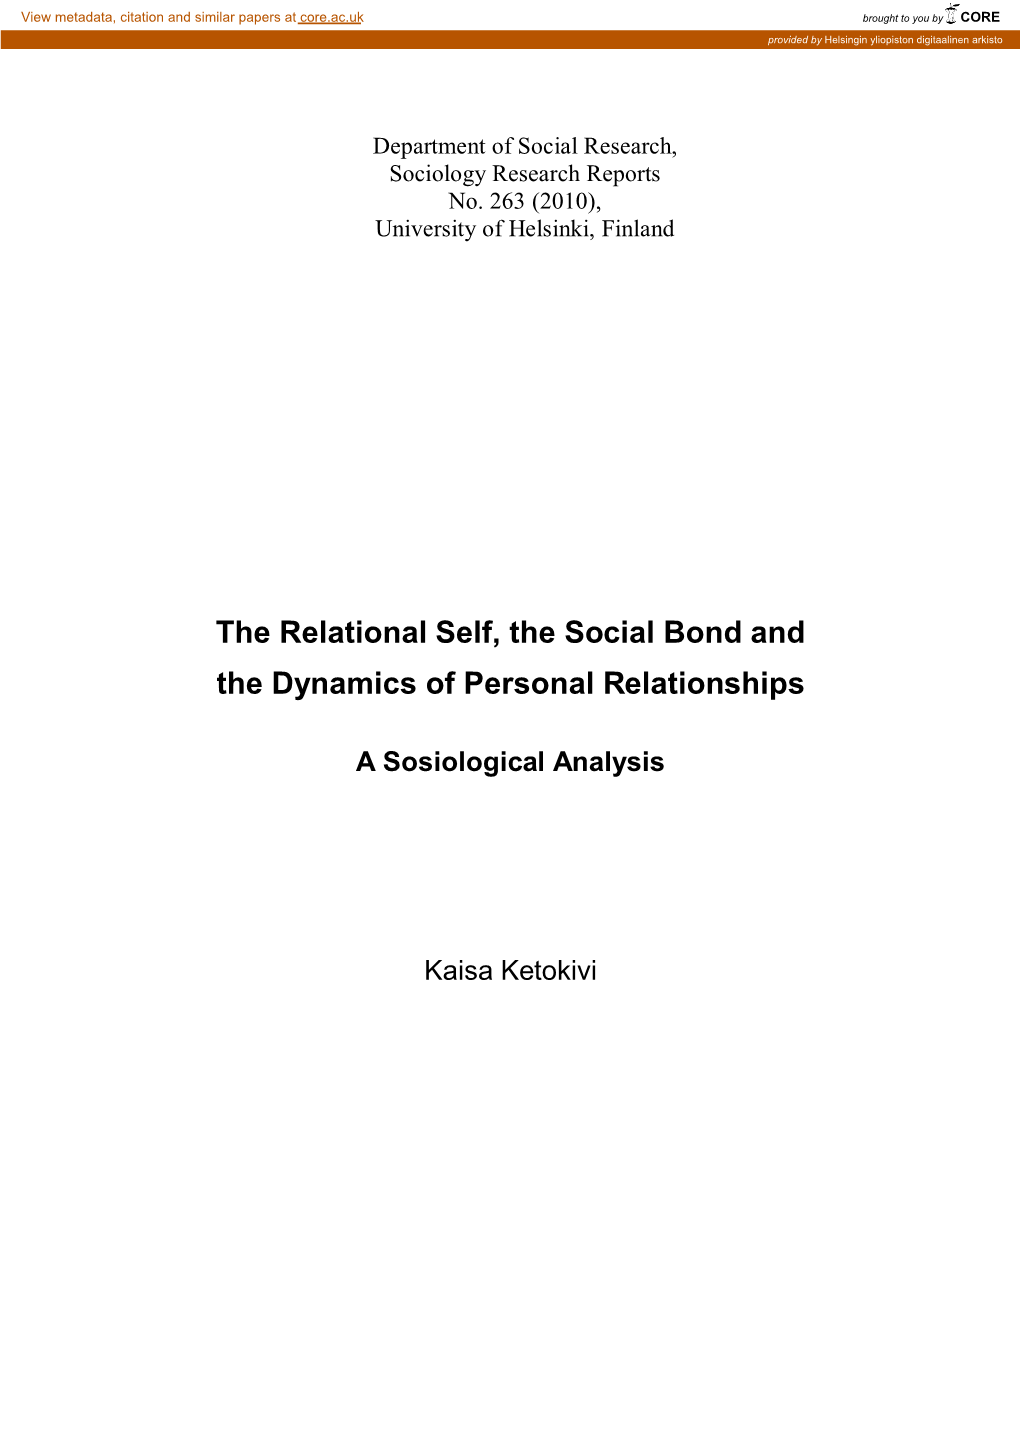 The Relational Self, the Social Bond and the Dynamics of Personal Relationships